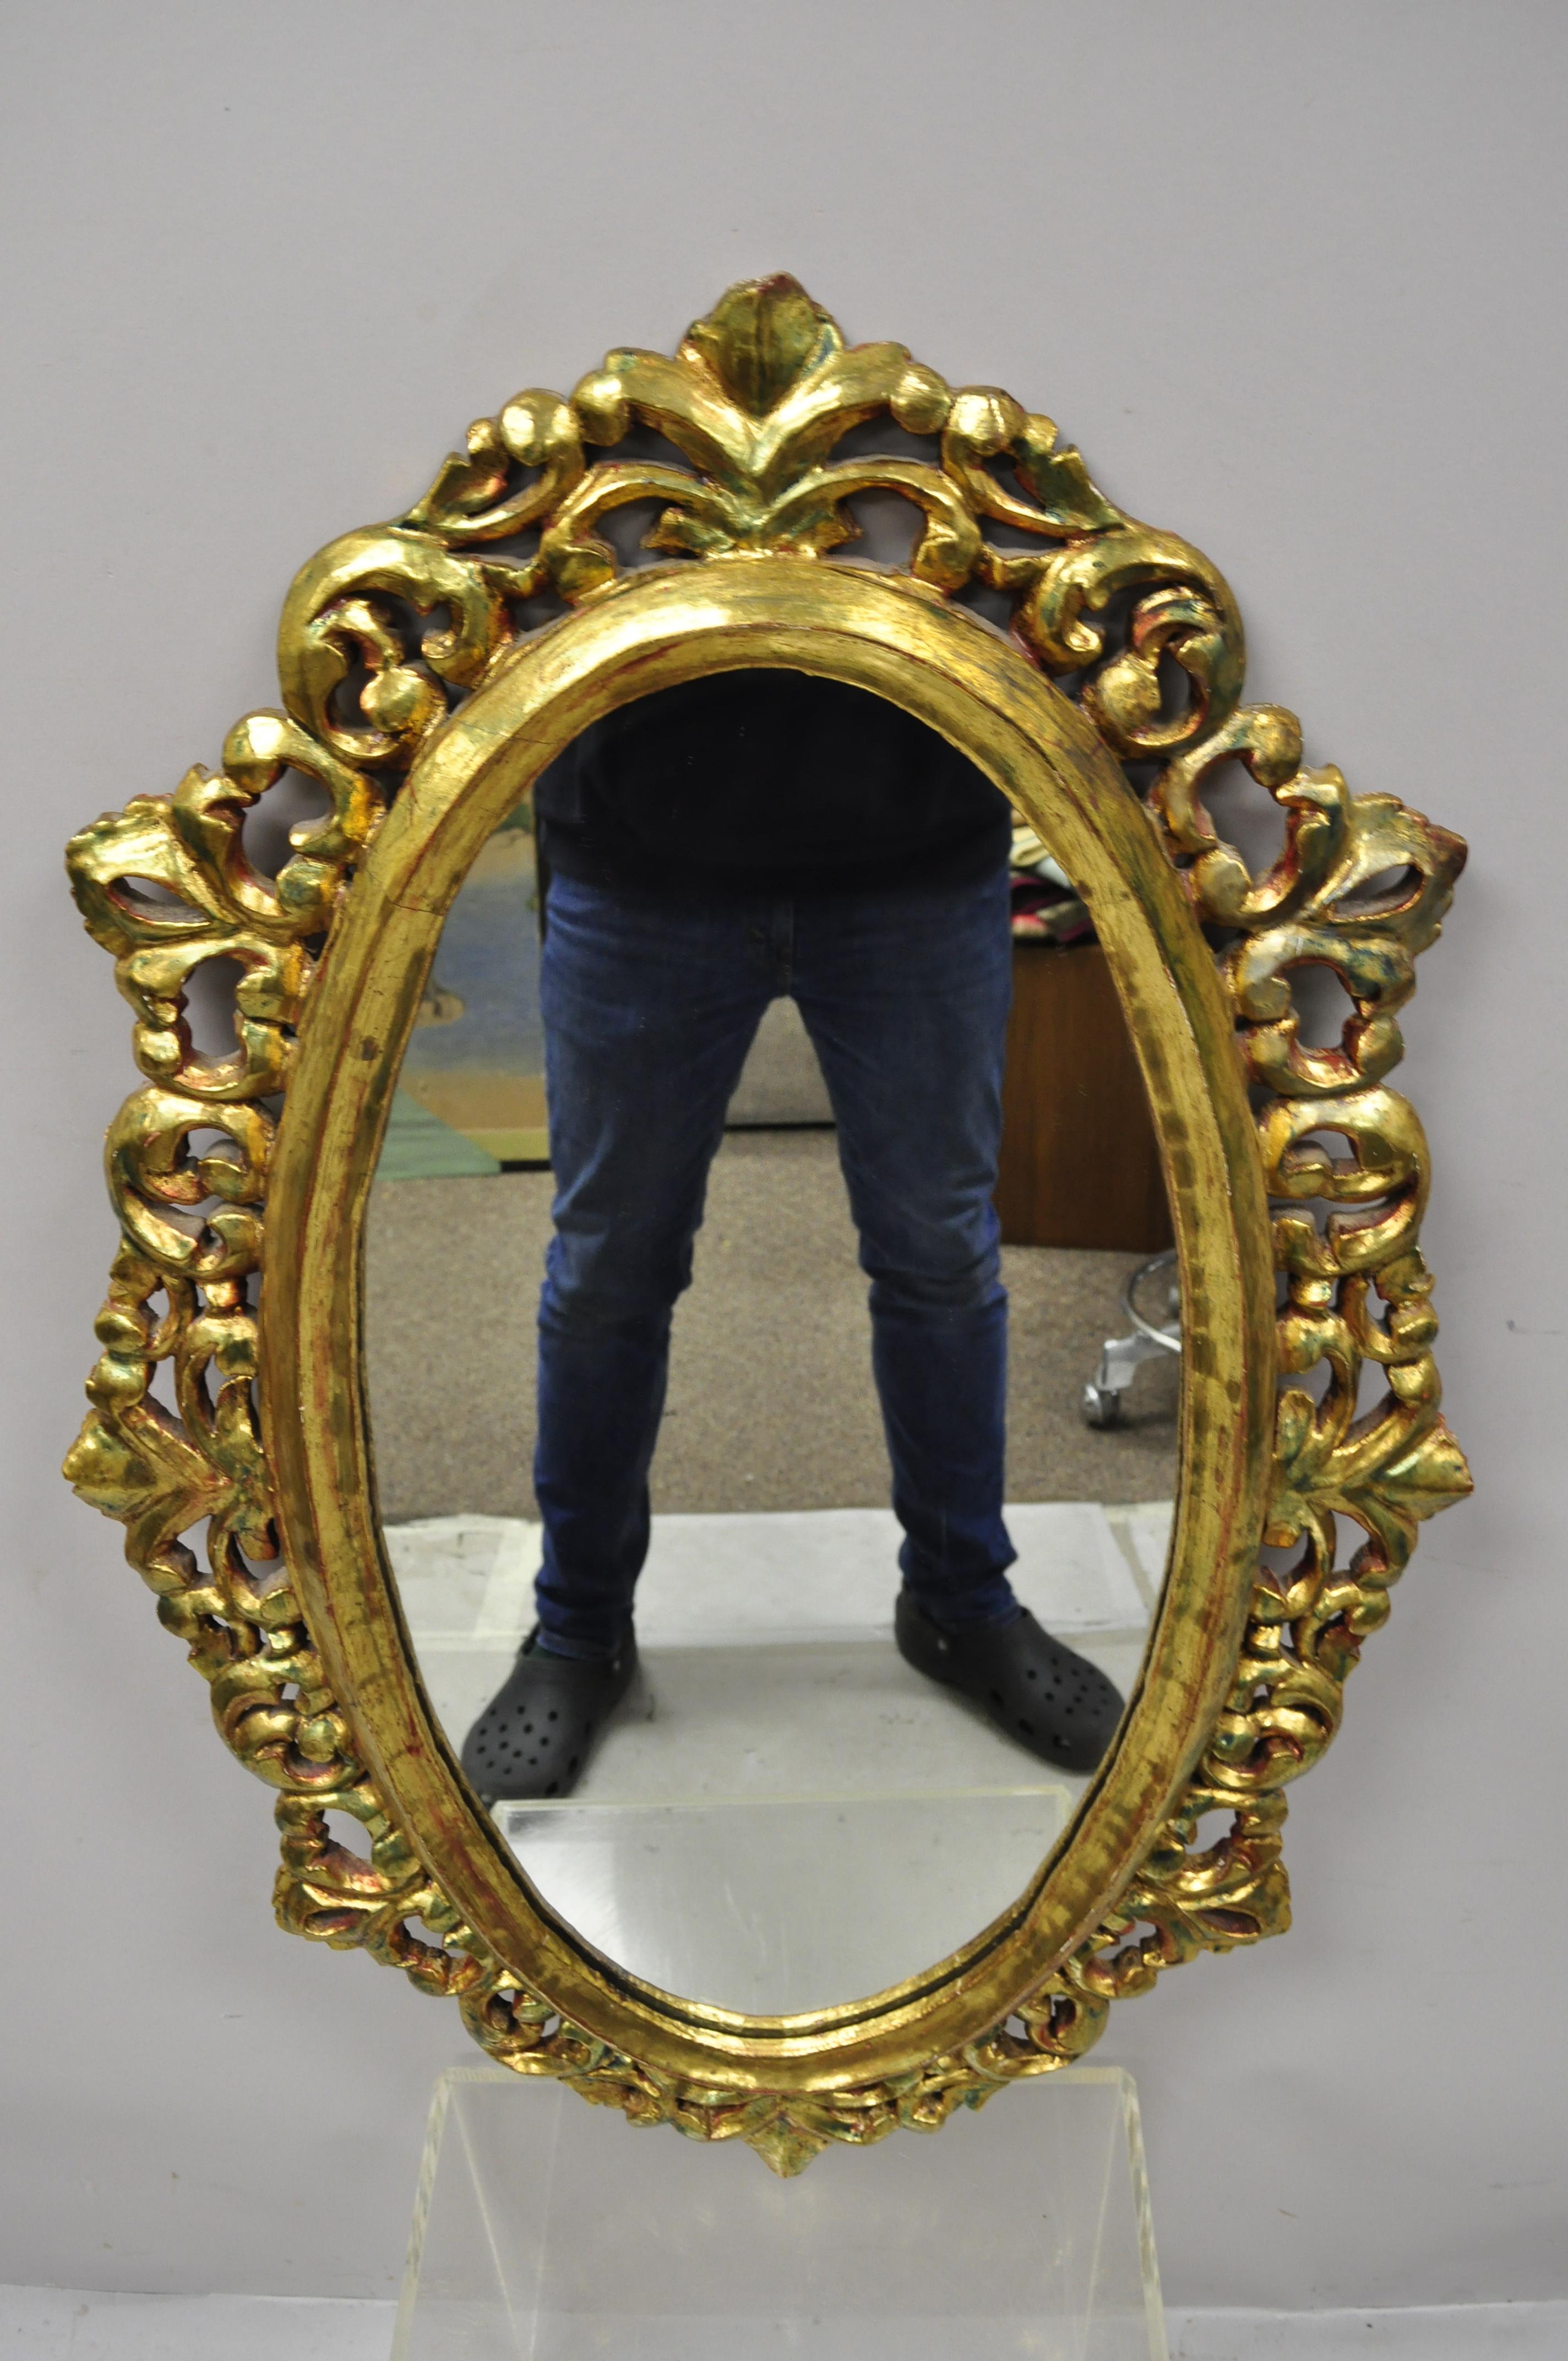 Antique French Louis XV Rococo style gold giltwood pierce carved oval wall mirror. Item features gold gilt finish, solid wood frame, nicely carved details, great style and form. Wood frame appears to be from the early 1900s while the gold finish